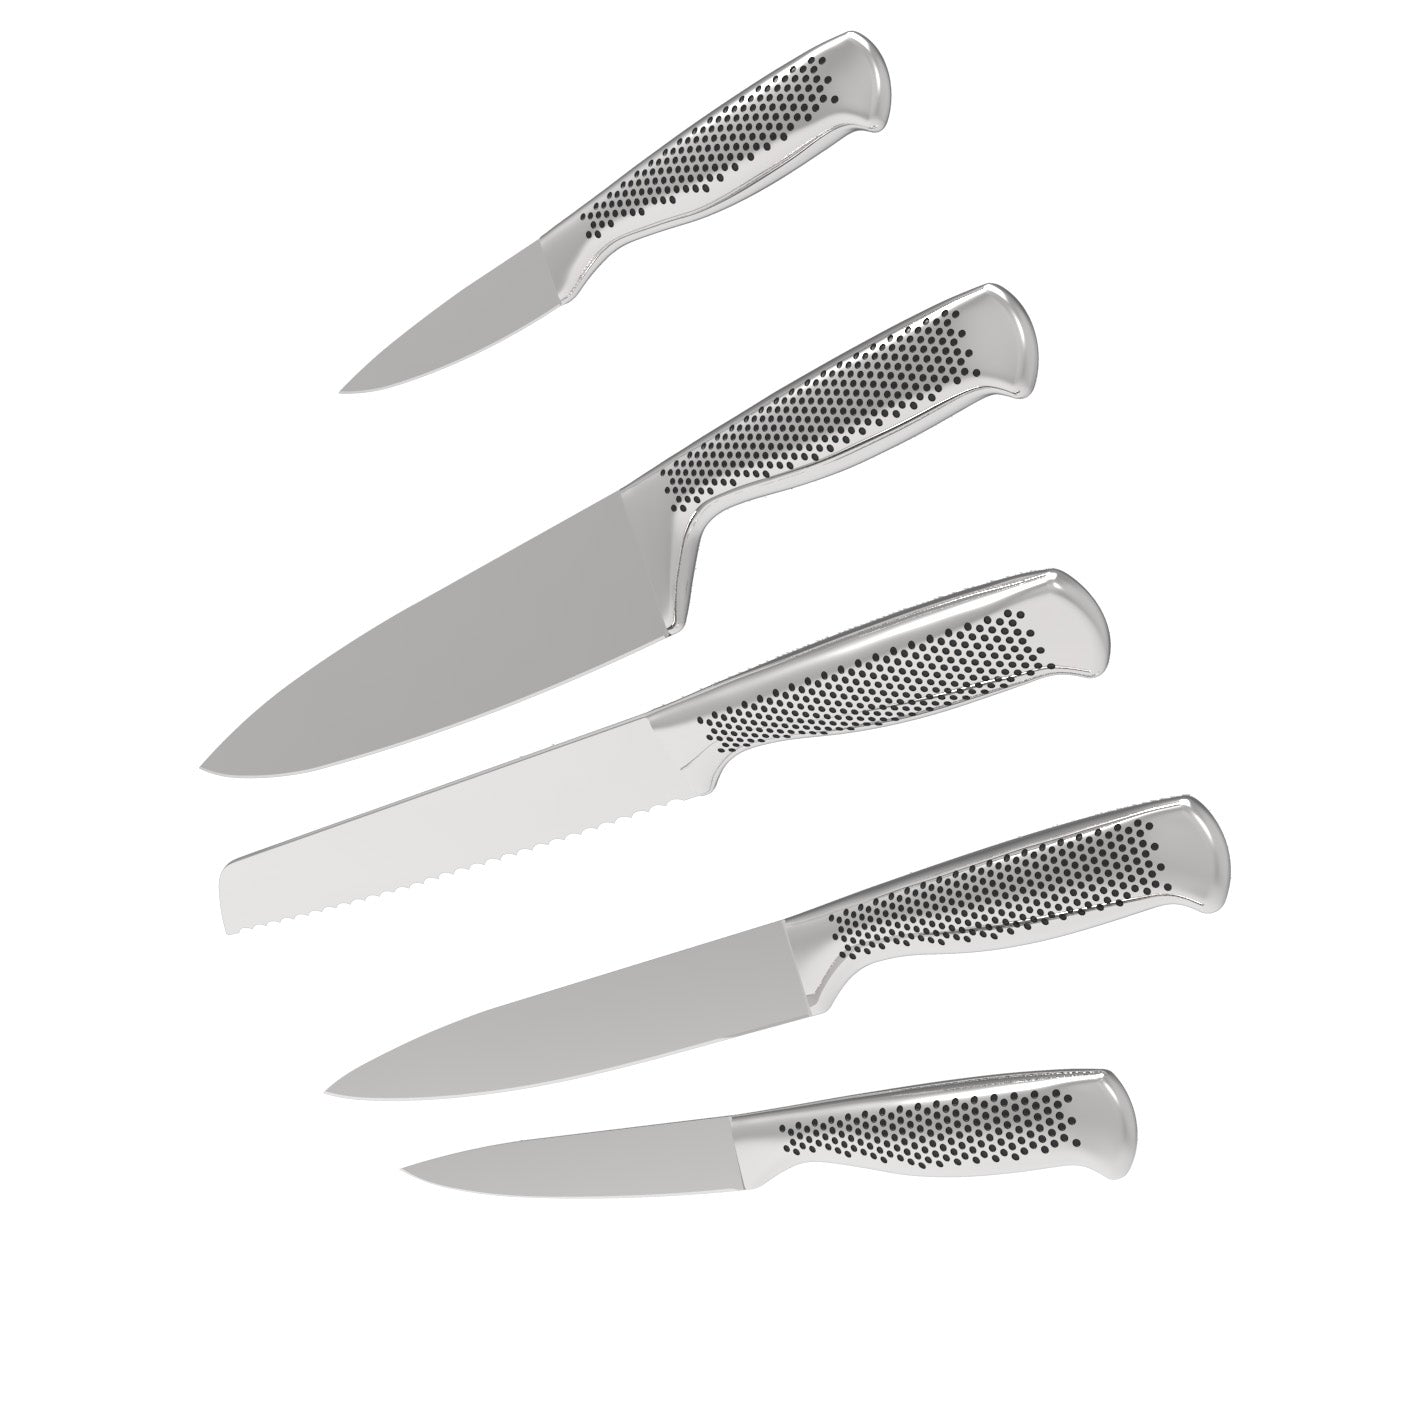 Voodoo/TheEx "Anniversary Edition" Knife Set - Spare Knives